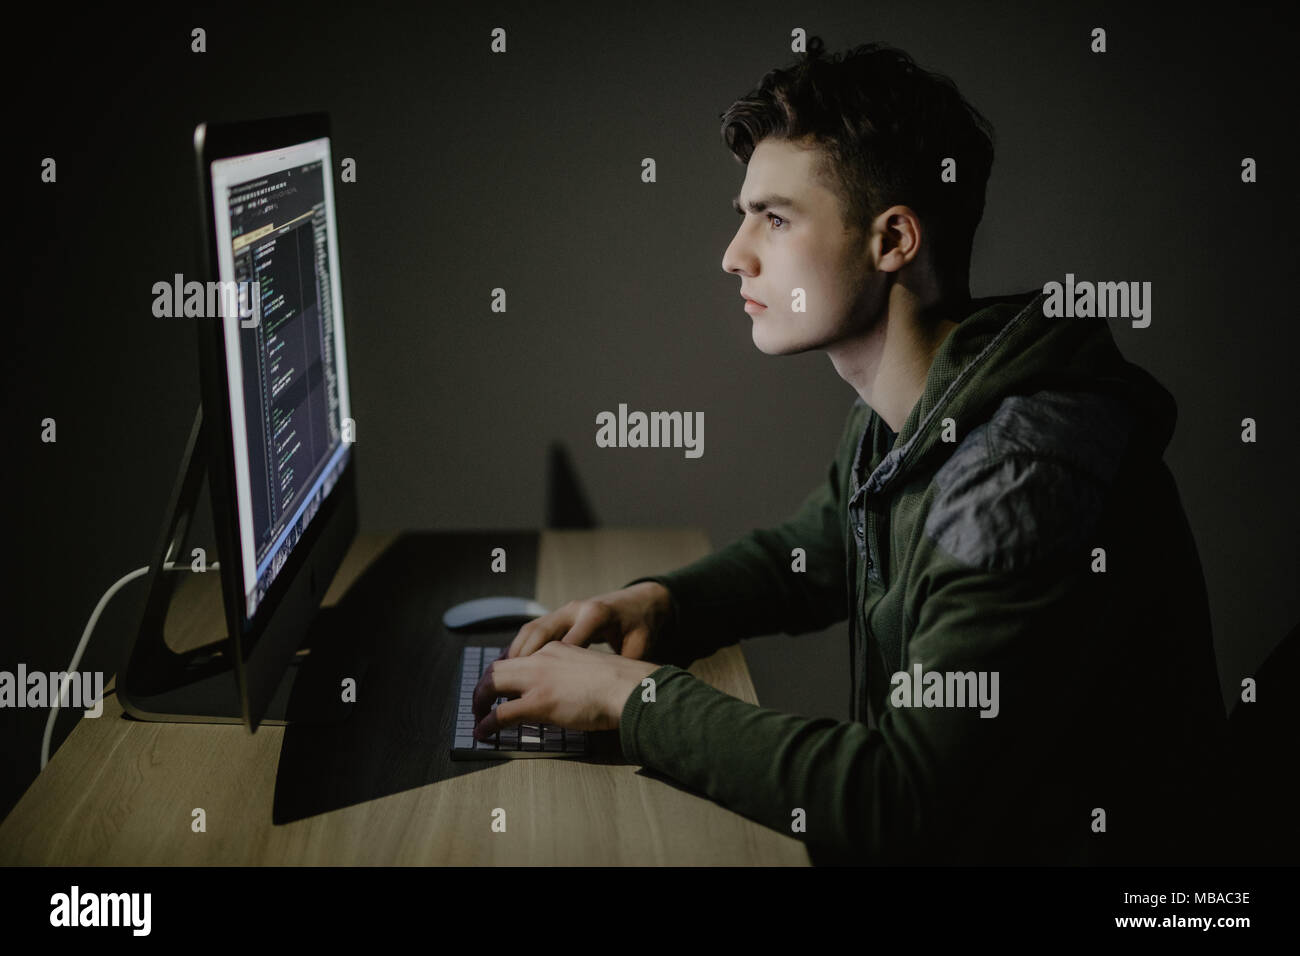 Handsome male programmer, IT person, hacker, works in computer on internet, black background. Stock Photo